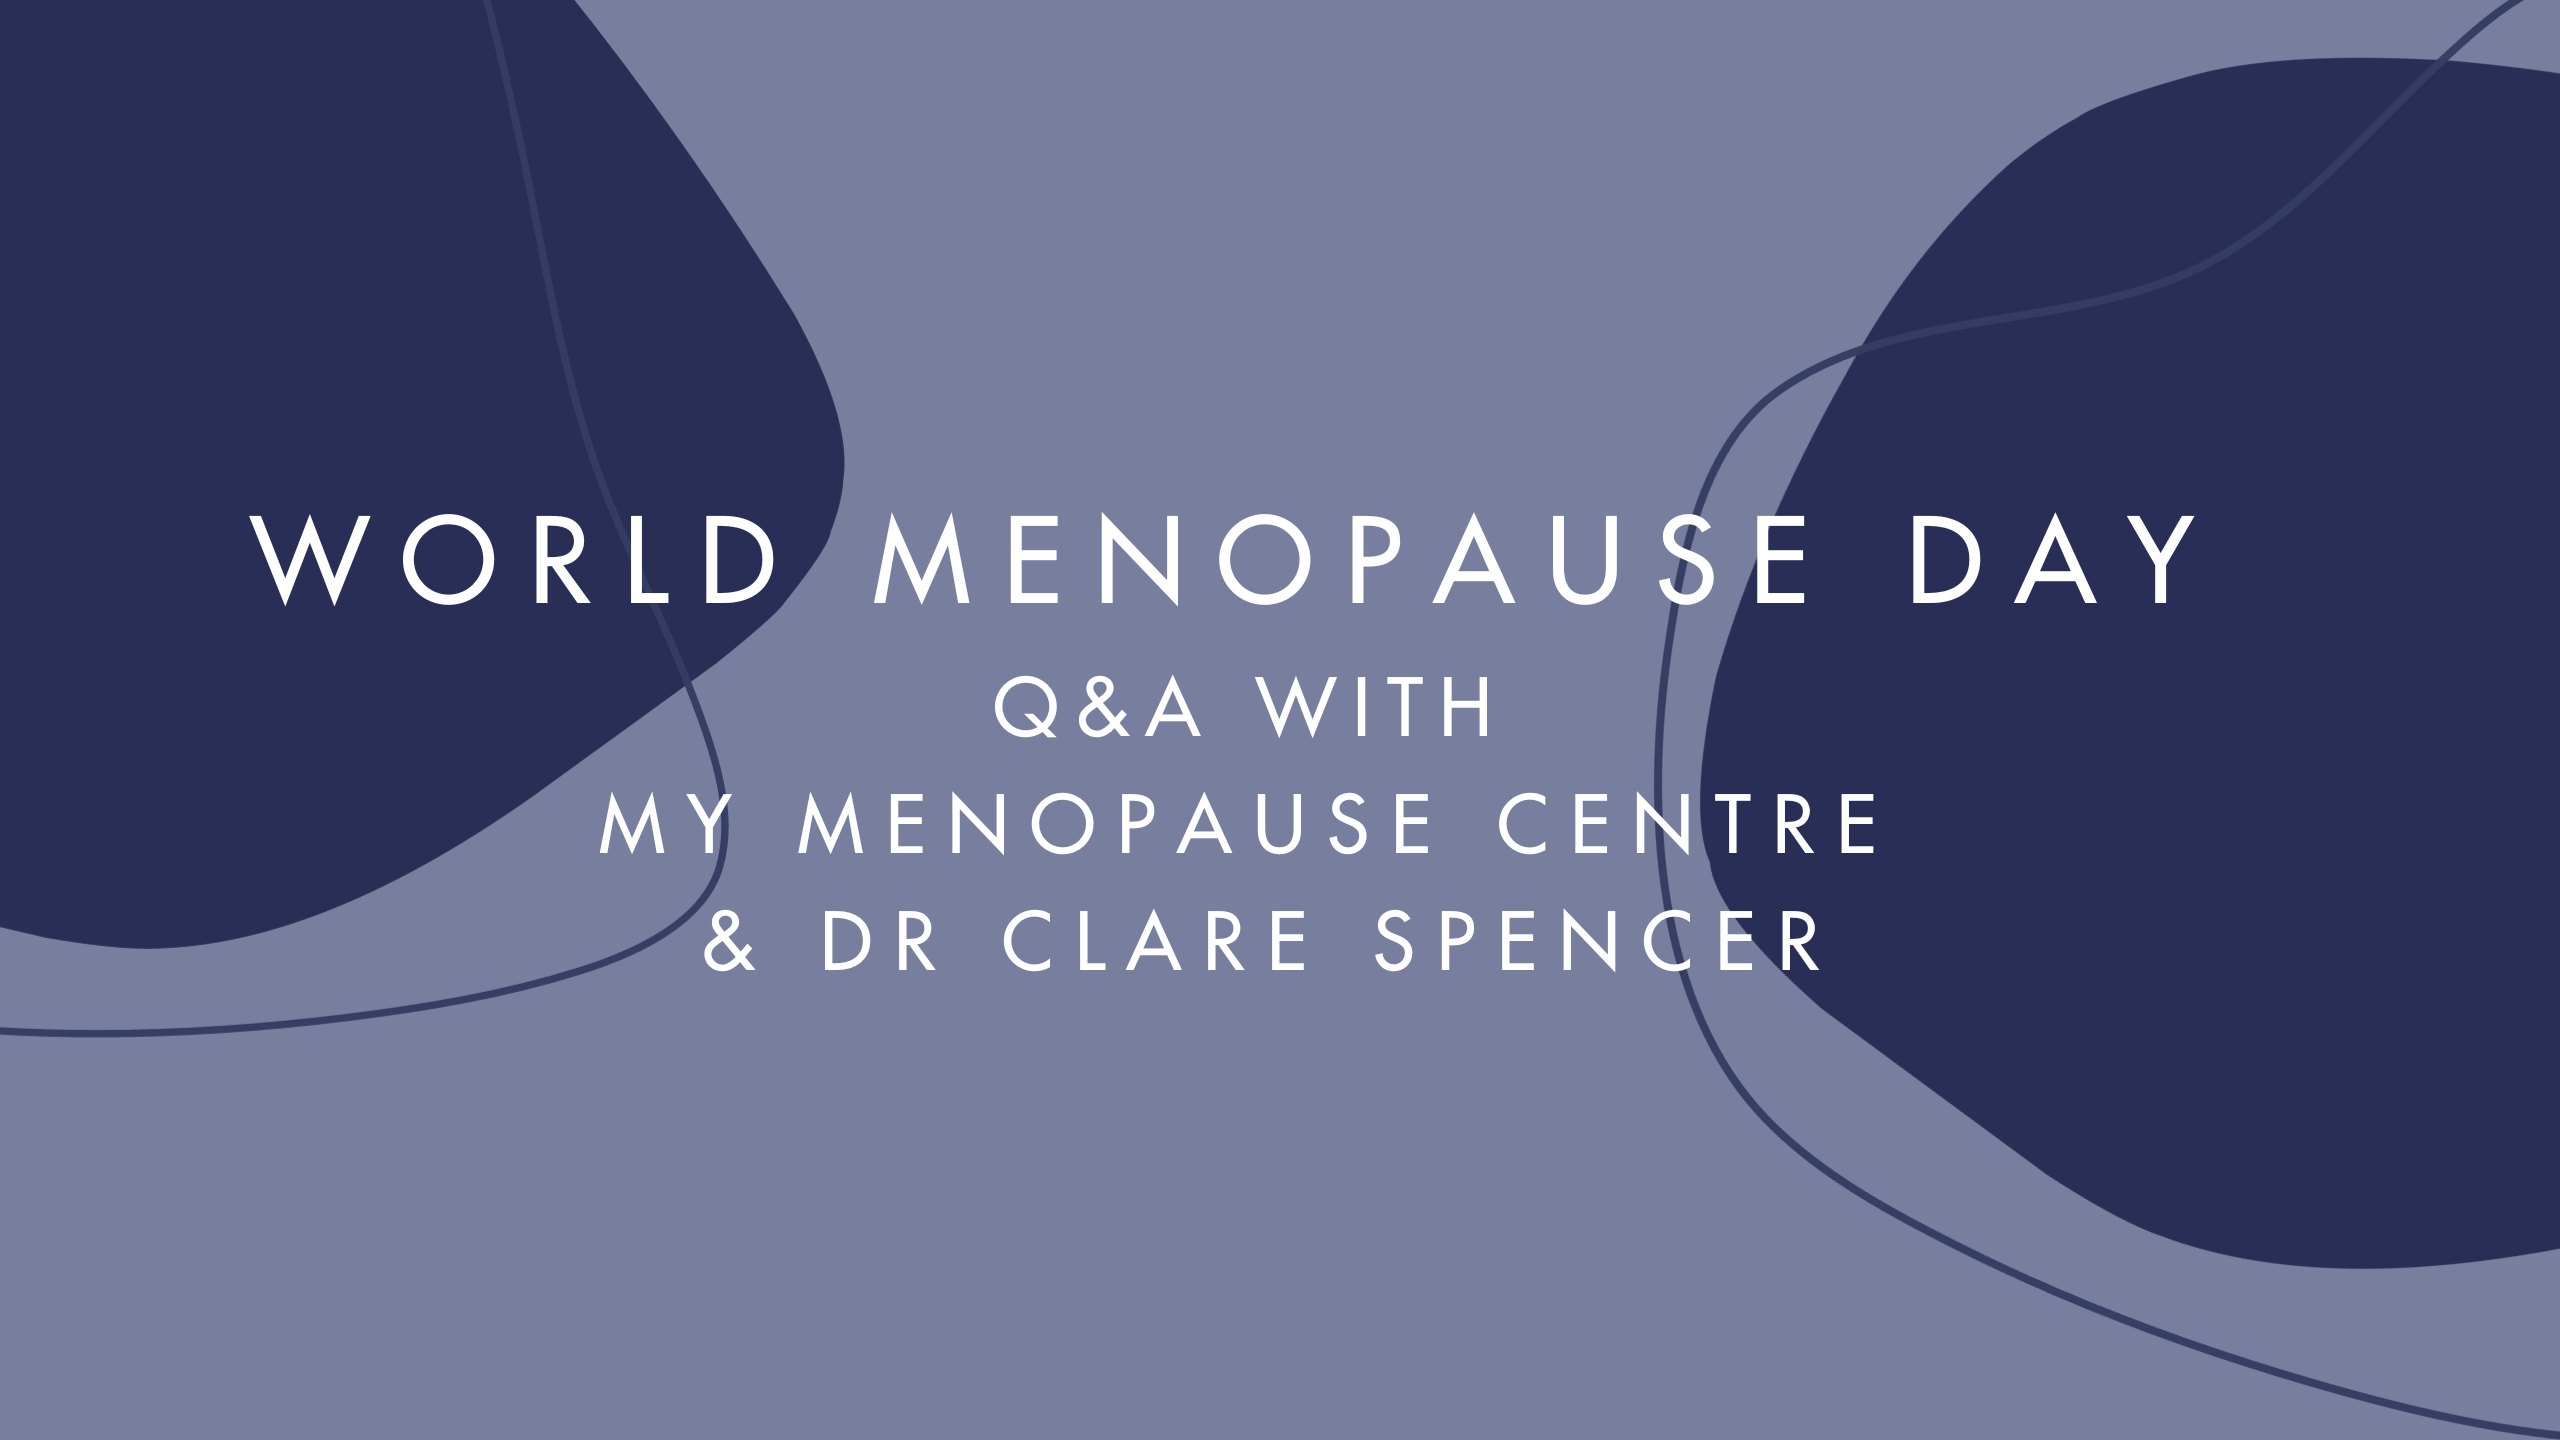 A Q&A With Dr Clare Spencer From My Menopause Centre